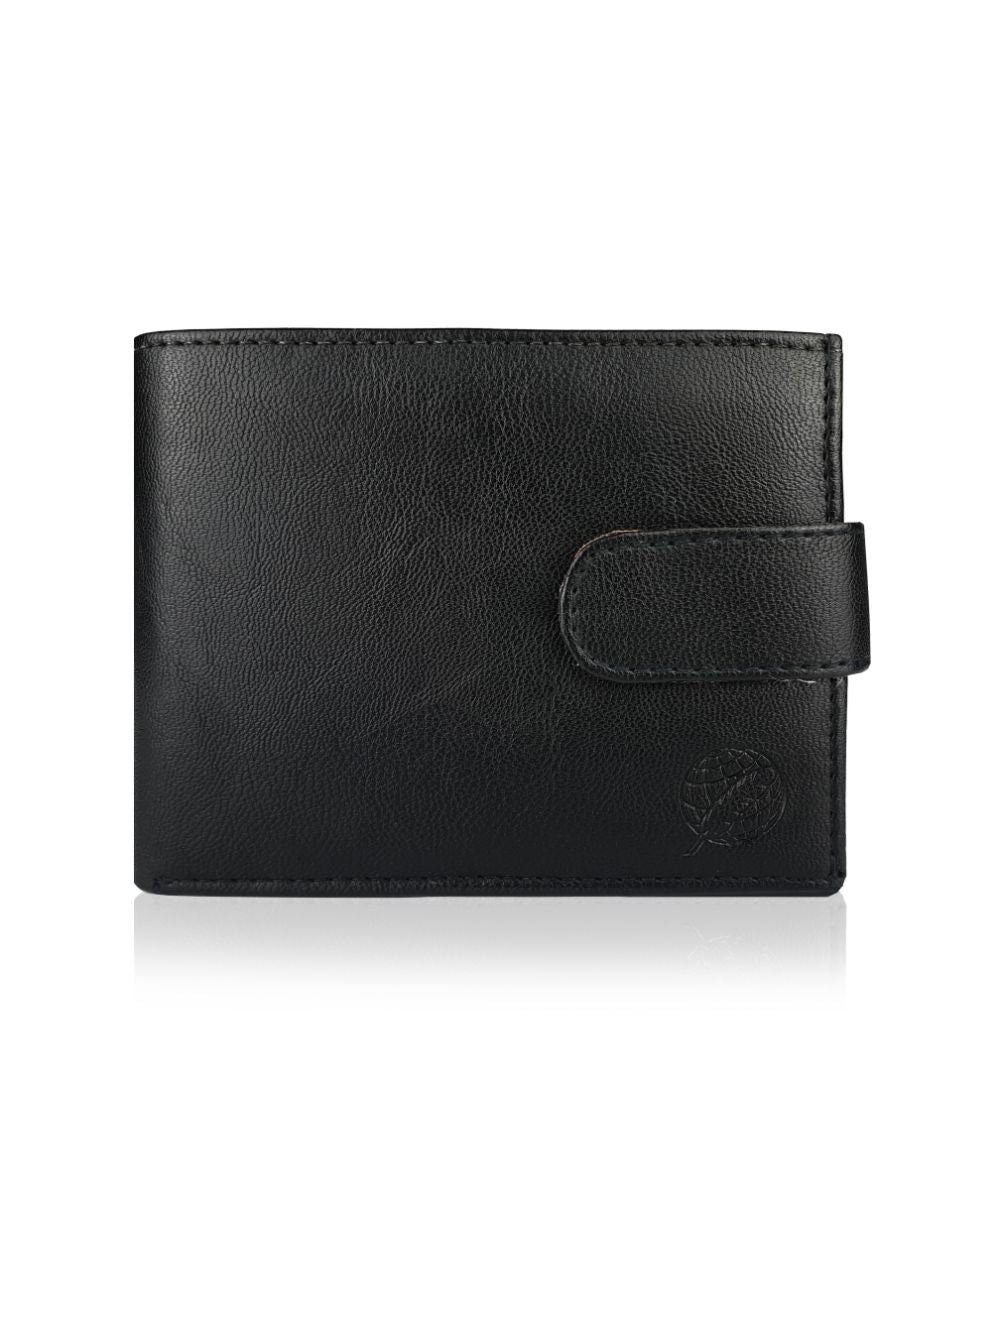 Mens Designer Leather Wallet - Pu Faux Leather - Trifold 2 Tone - R911